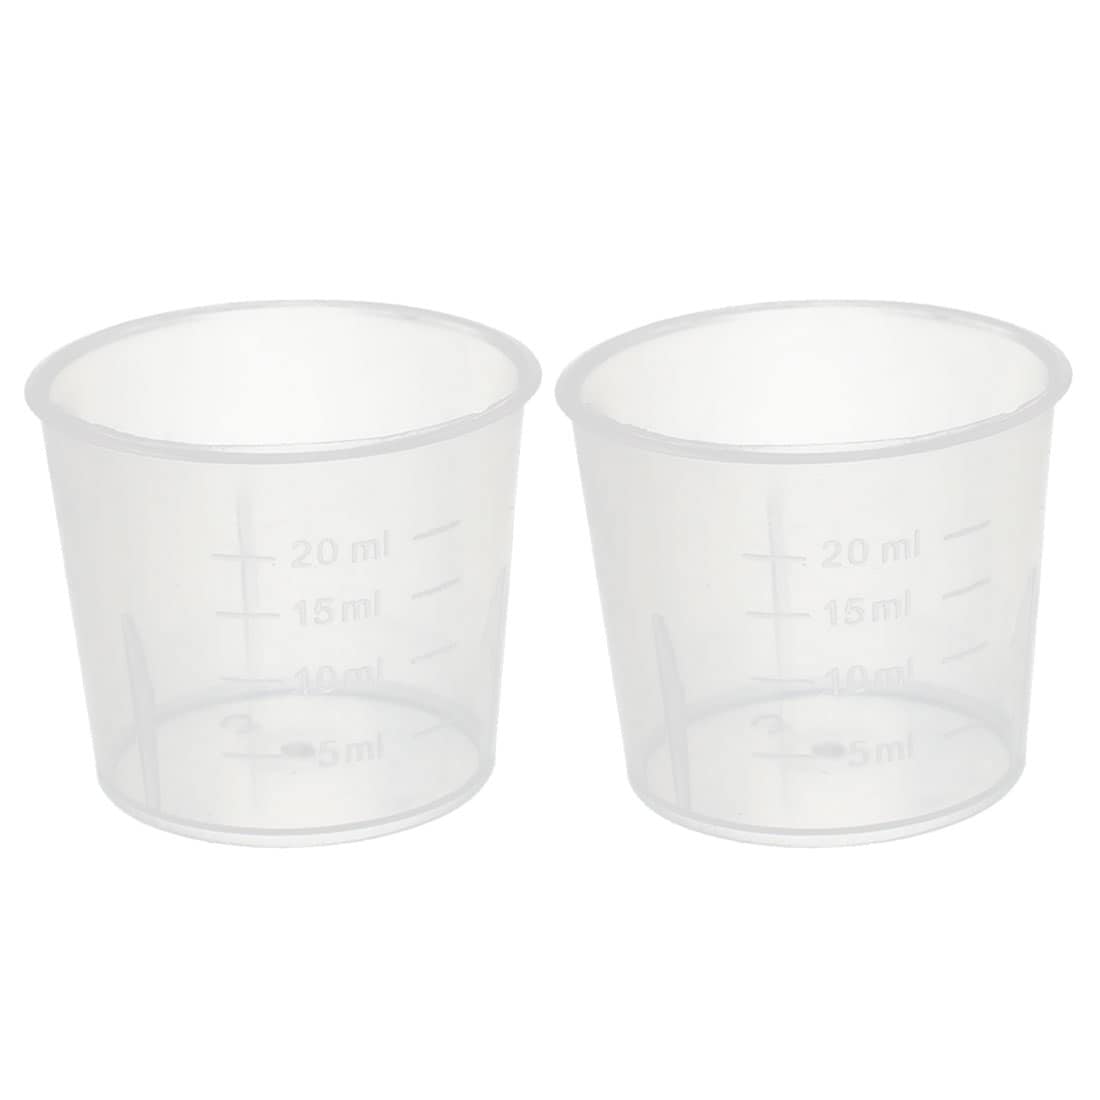 https://ak1.ostkcdn.com/images/products/is/images/direct/89ae83afdc3c472fb3bdcd6d32172b4ae9a4a71a/2Pcs-Kitchen-Labotary-20mL-Plastic-Measuring-Cup-Jug-Pour-Spout-Container.jpg